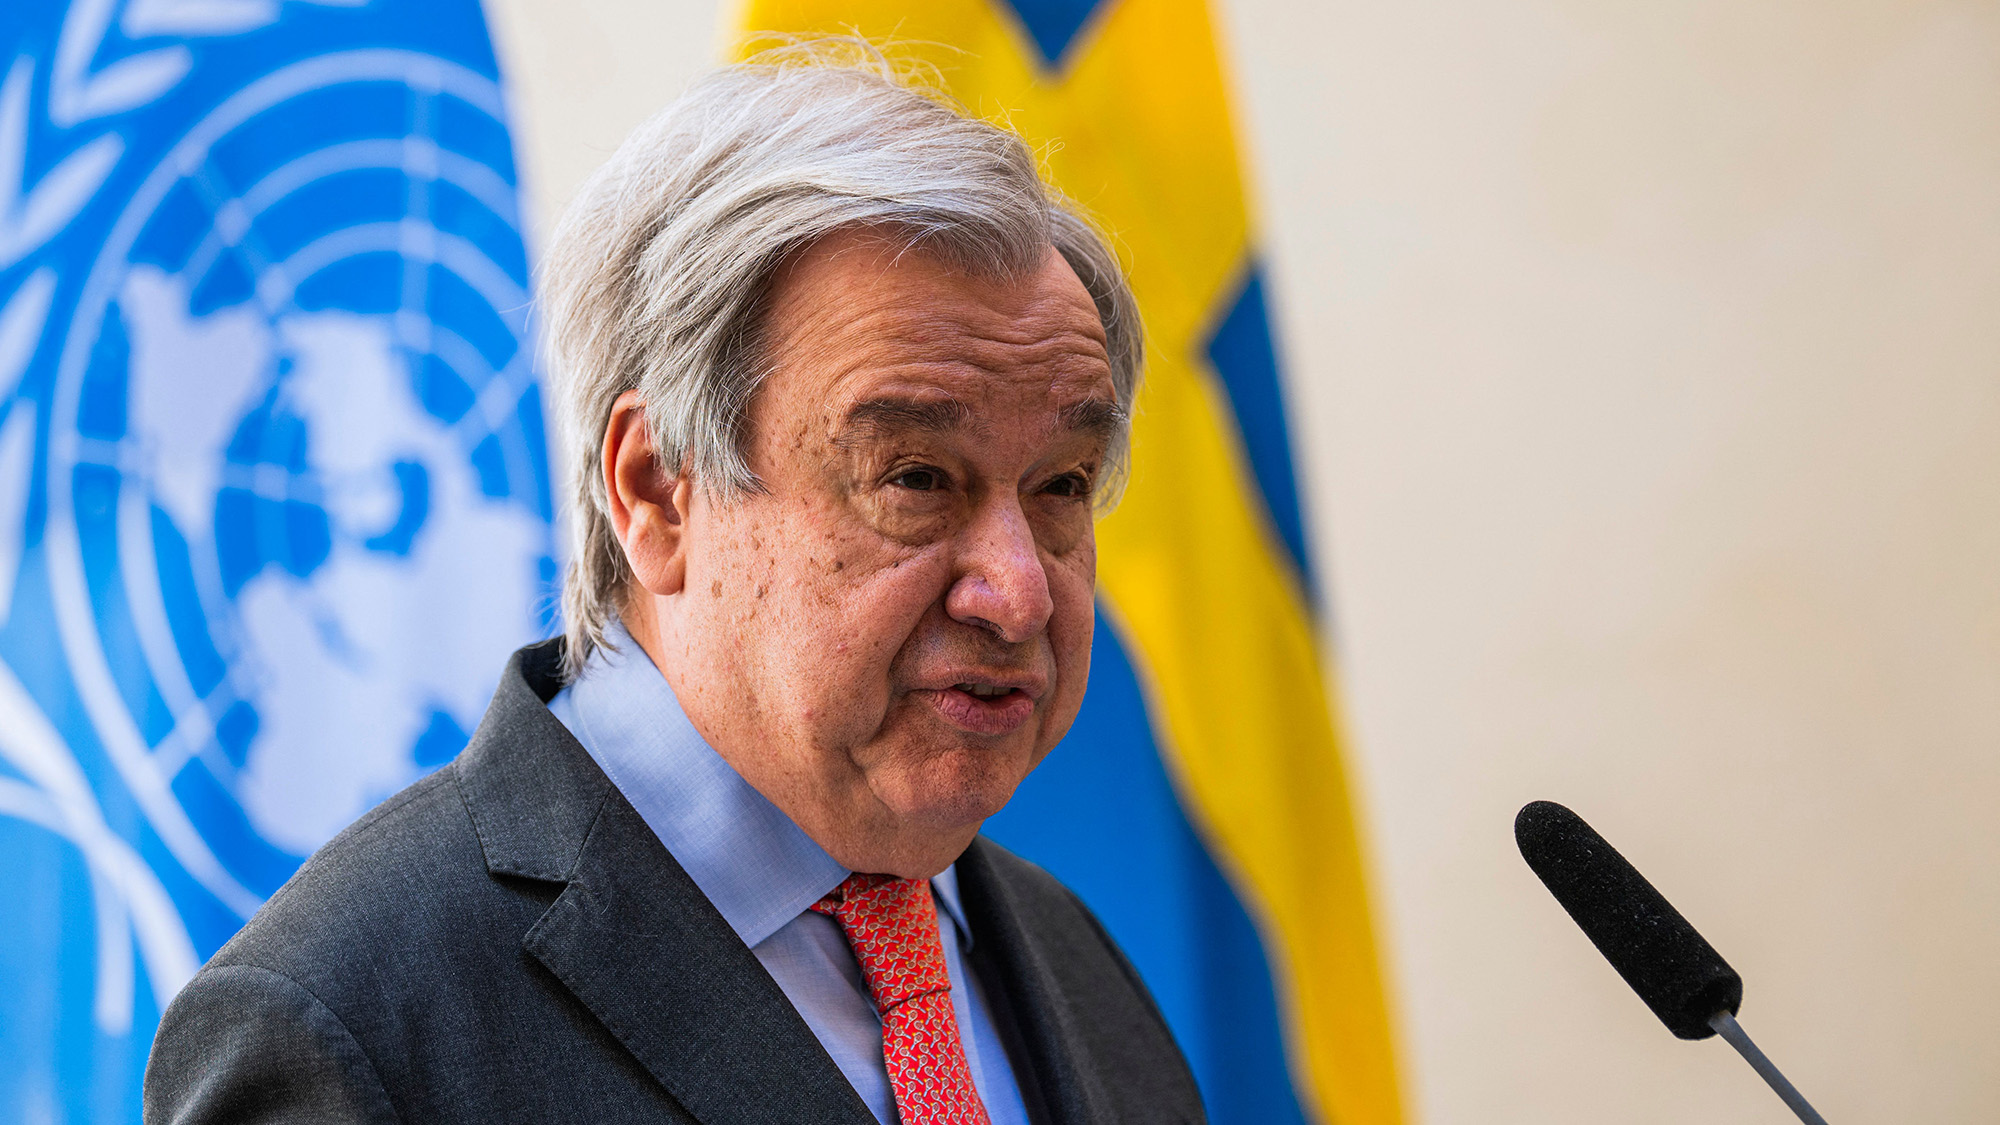 United Nations Secretary-General Antonio Guterres speaks with the media in Stockholm on June 1.